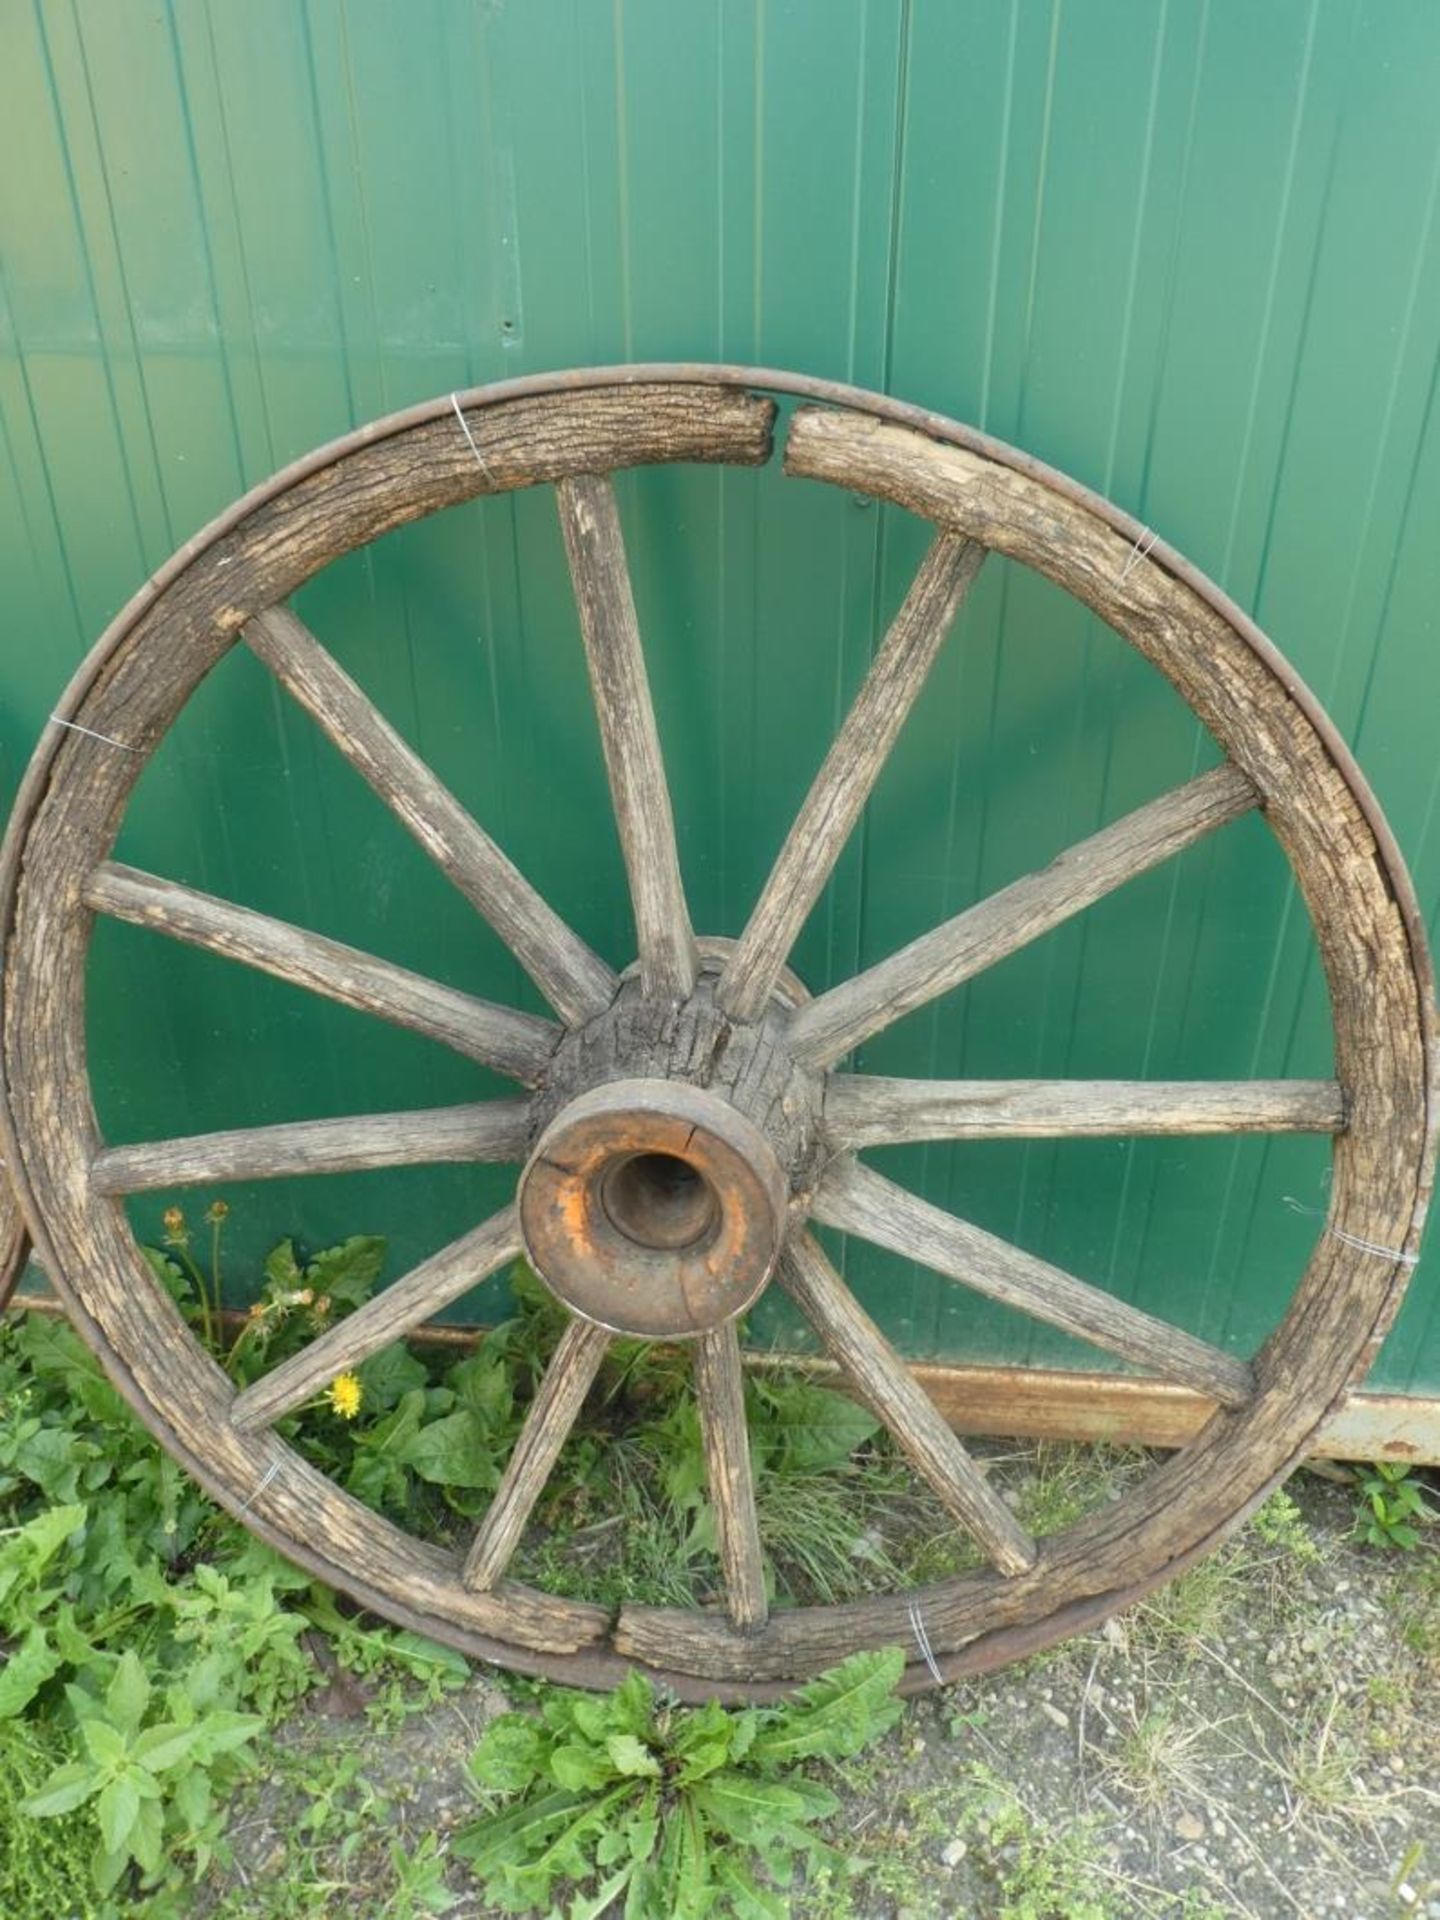 2 BUGGY WHEELS & 1 WAGON WHEEL (ALL IN POOR SHAPE) - Image 2 of 4